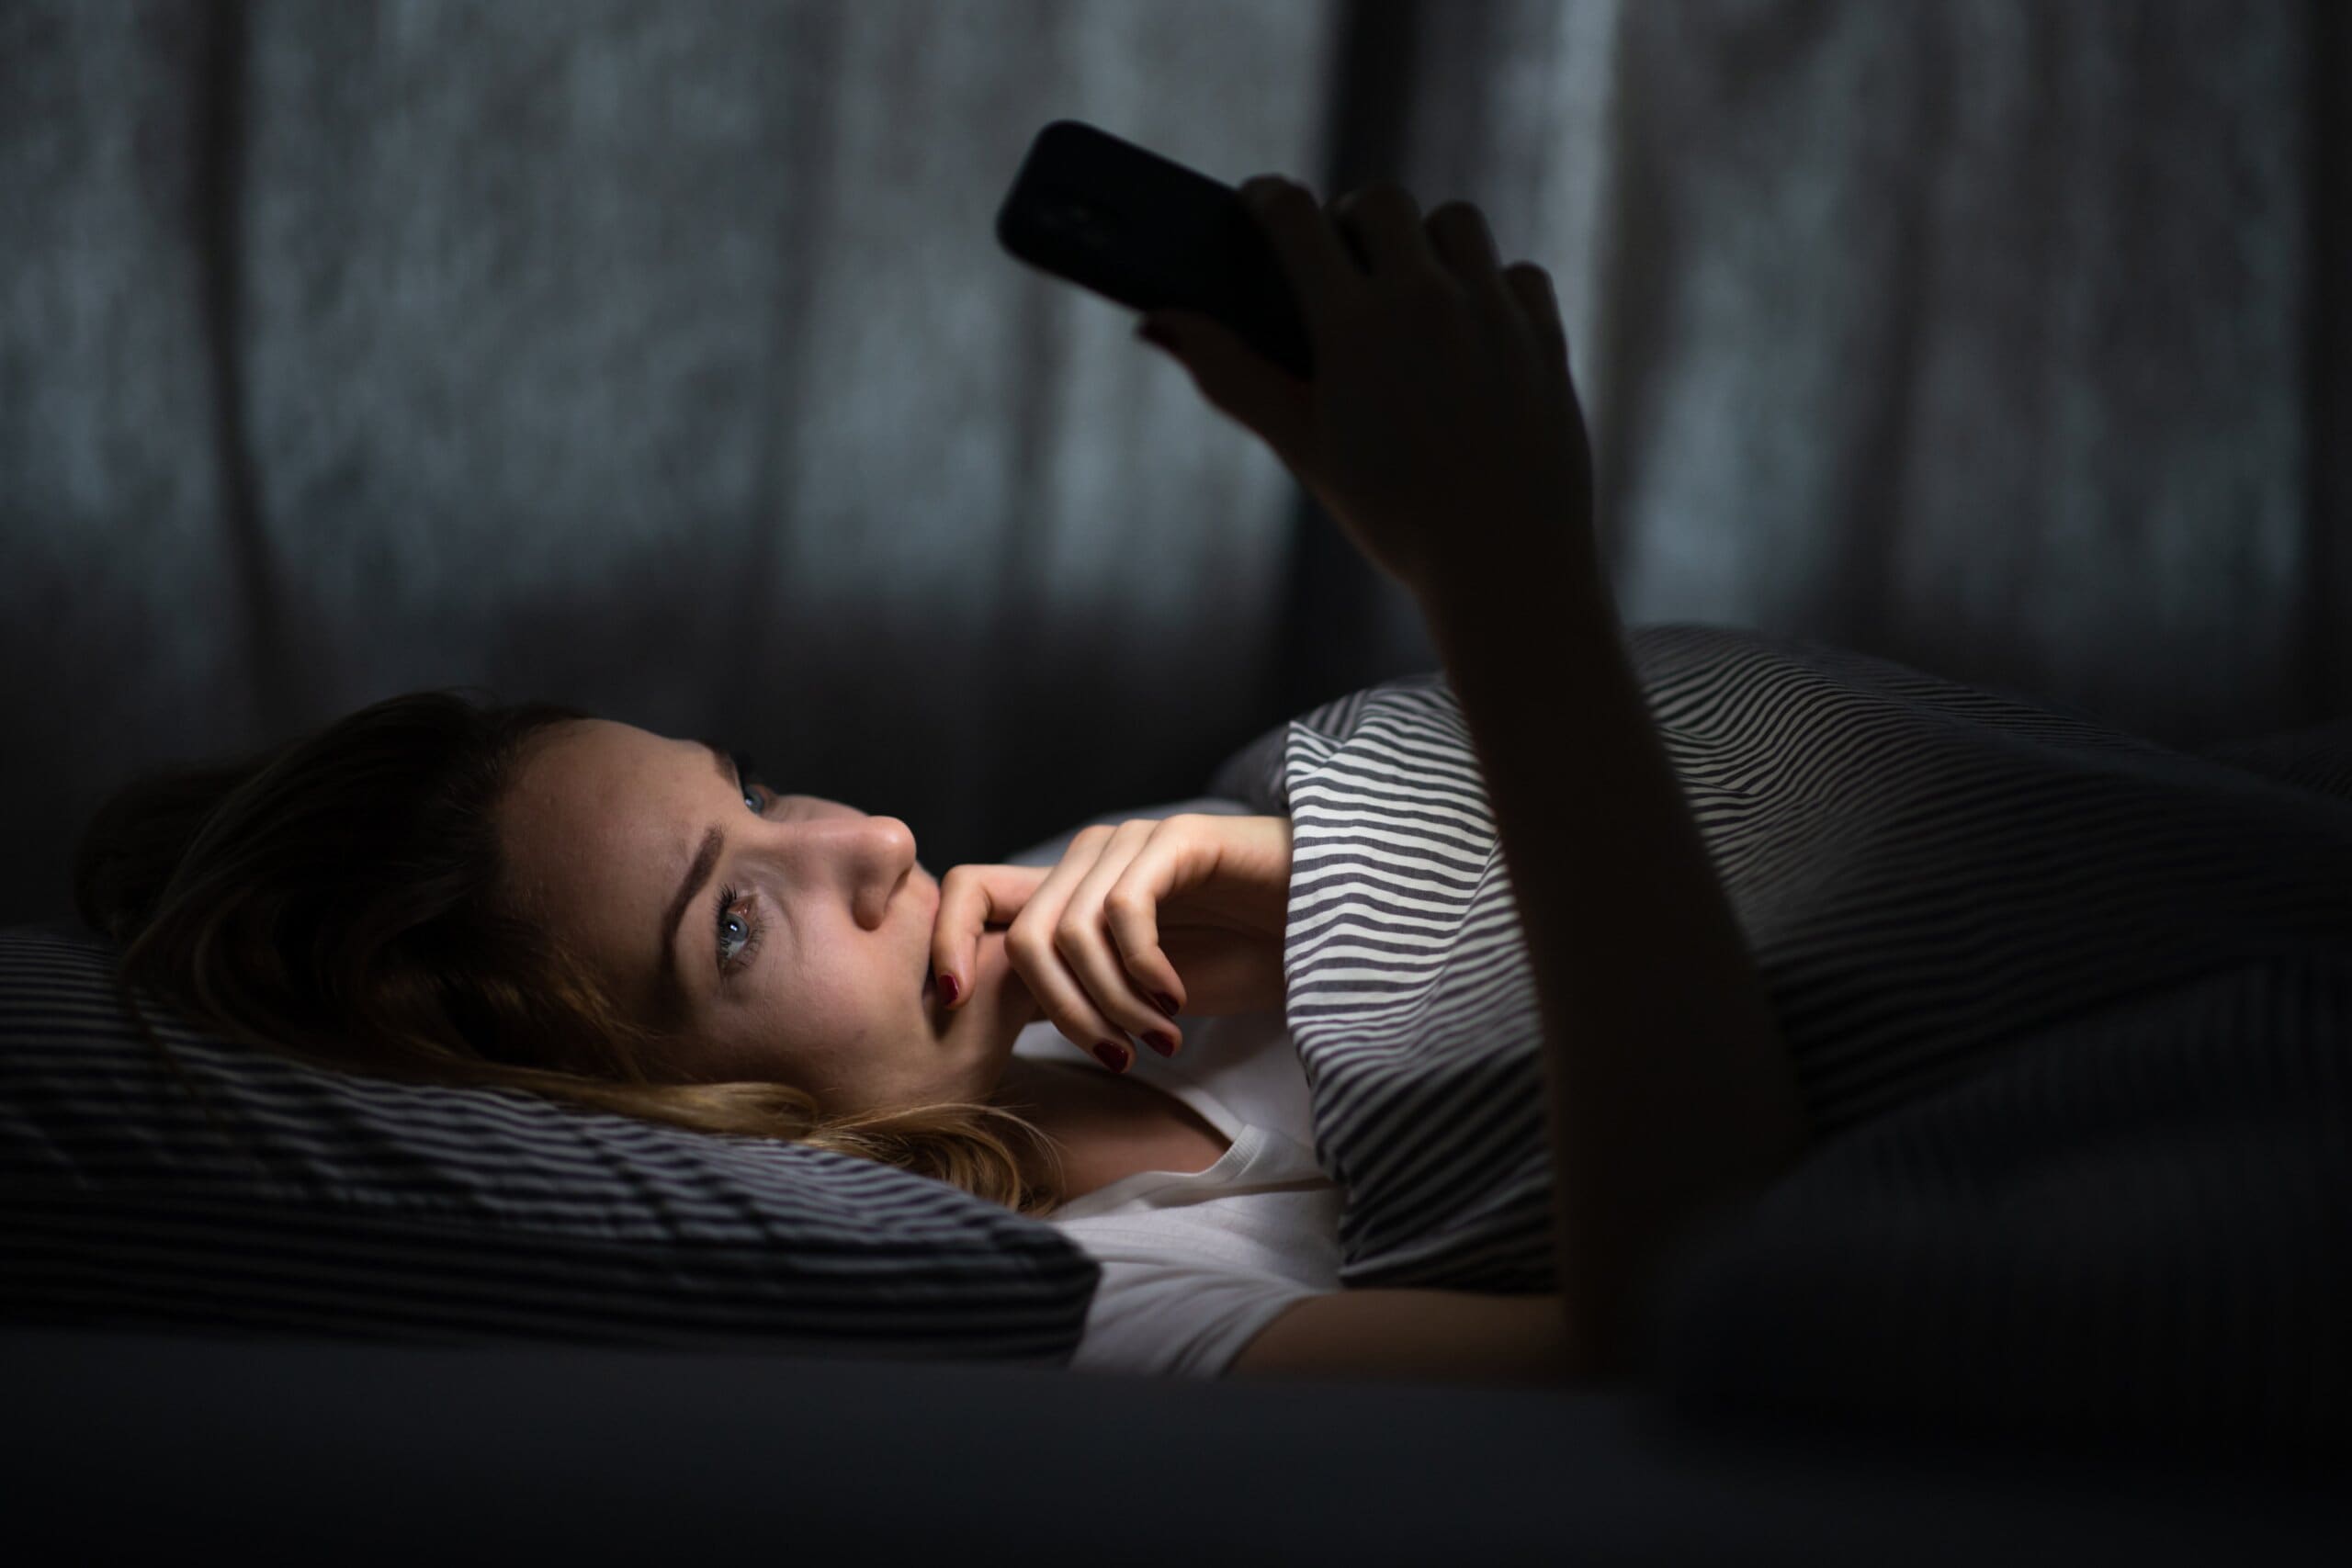 Young woman in bed holding a phone, tired and exhausted, blue light straining her eyes, messing up her circadian rhytm.